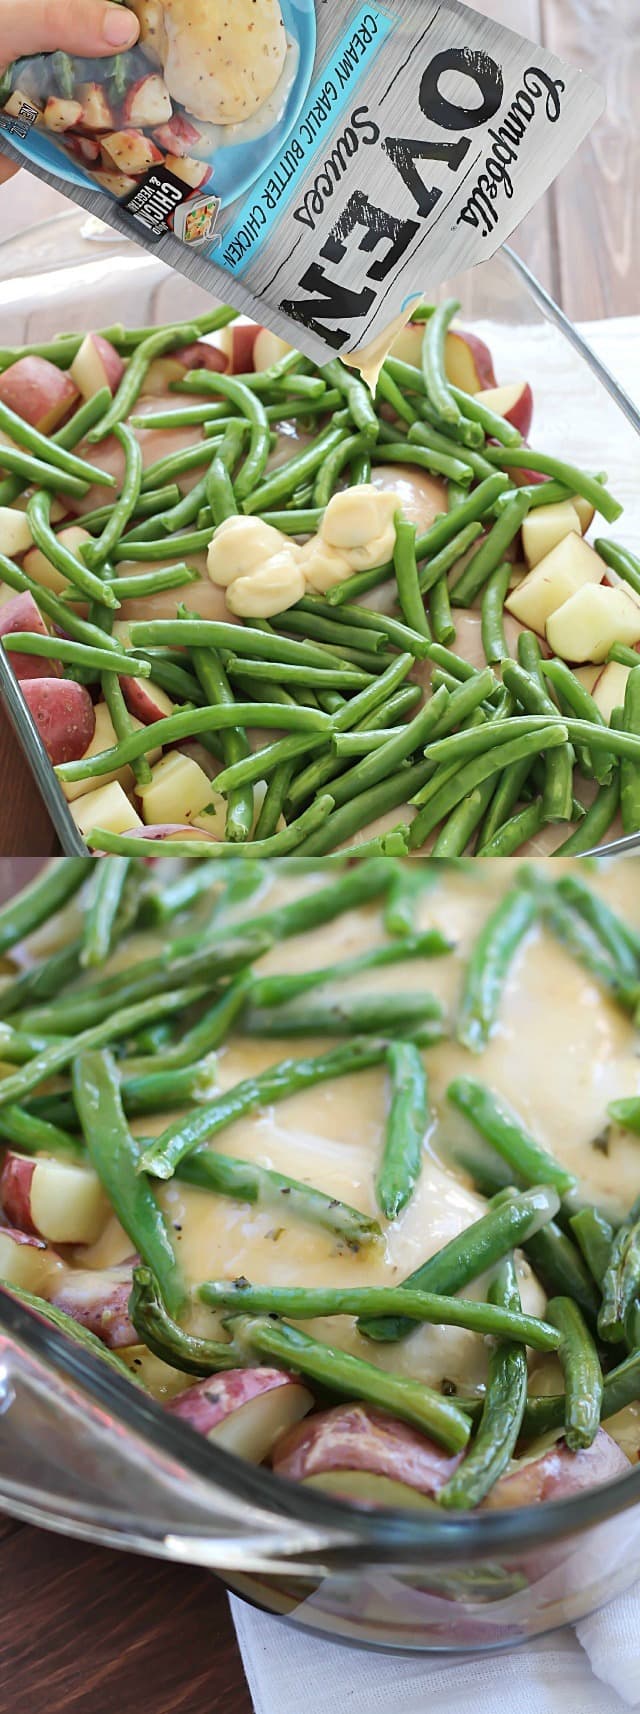 Easy {One Pot} Garlic Butter Chicken, Green Beans & Potatoes - an easy dinner with only a few ingredients for a quick weeknight meal everyone will love!